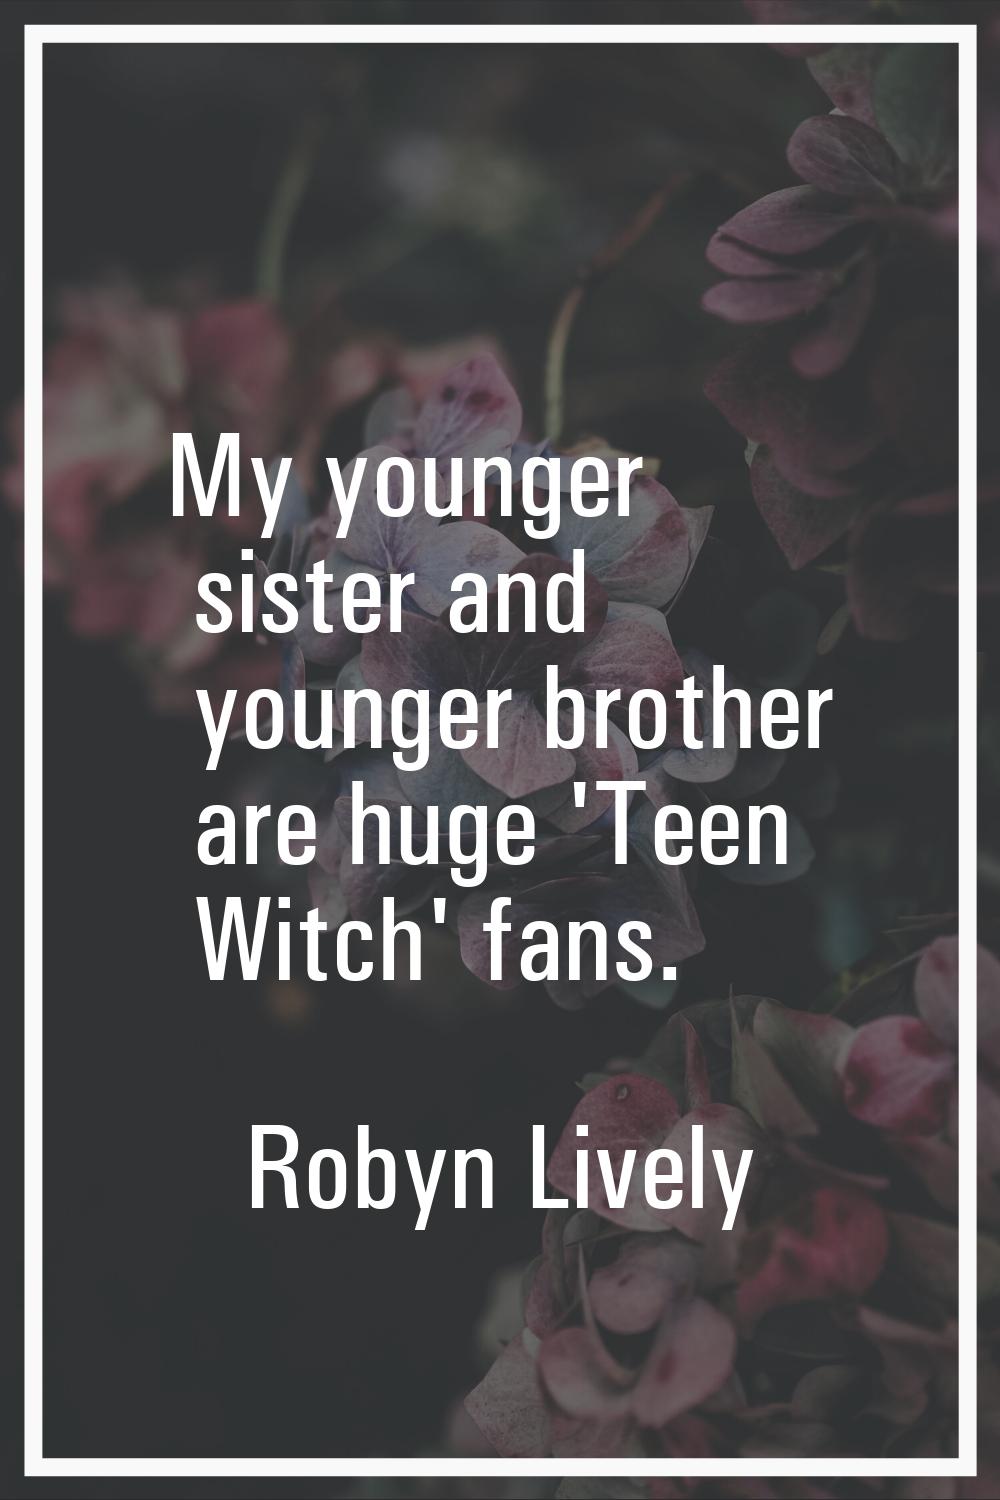 My younger sister and younger brother are huge 'Teen Witch' fans.